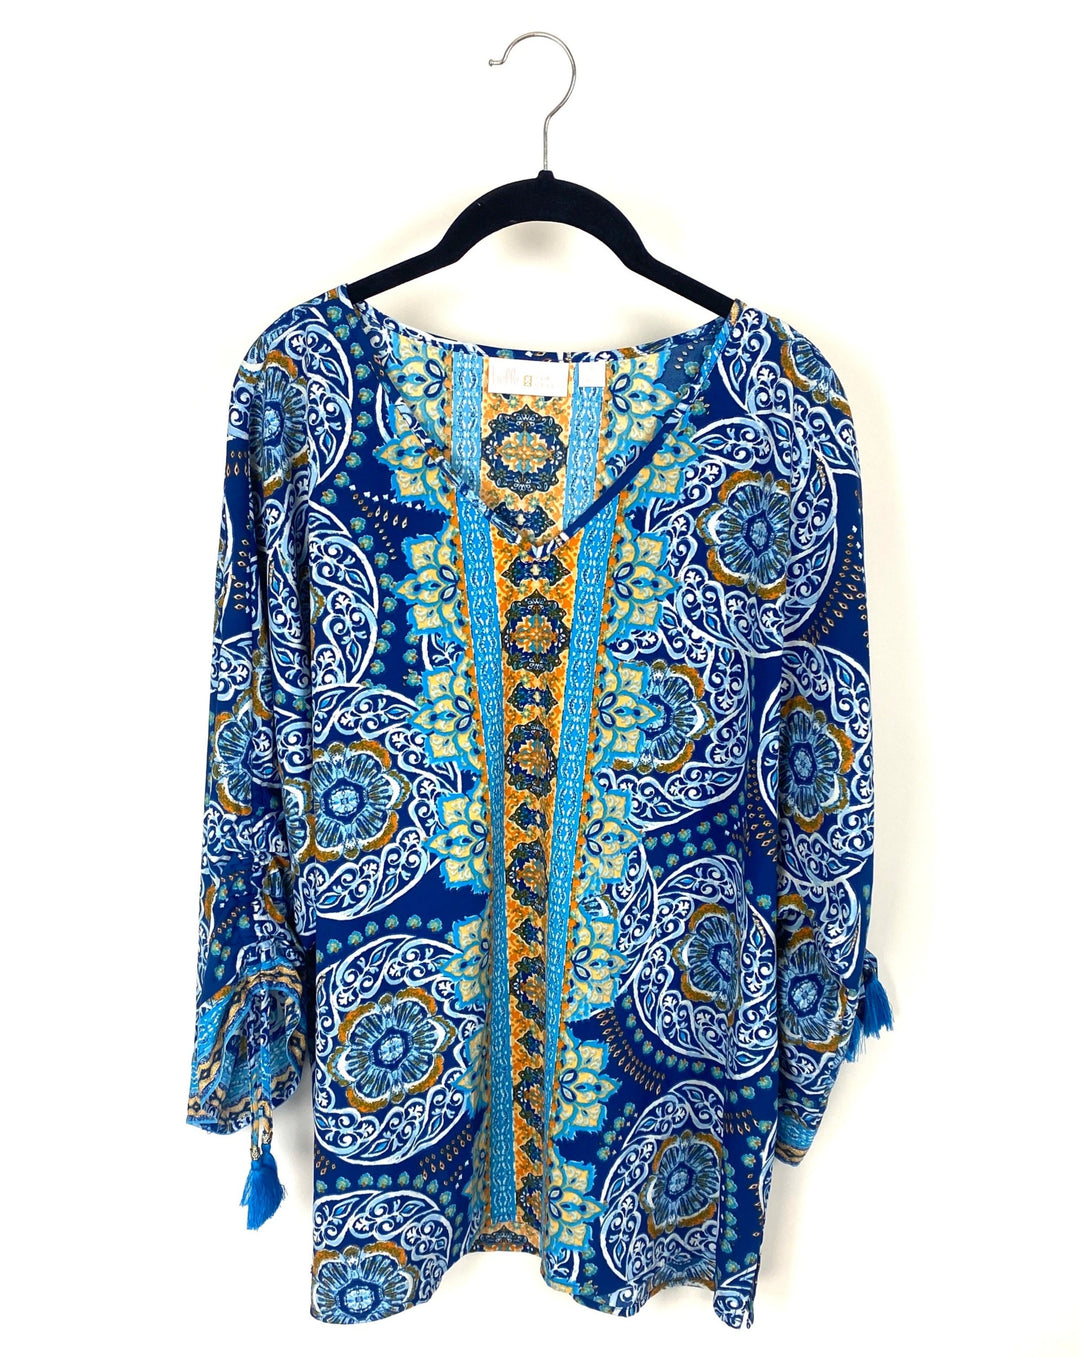 Yellow and Blue Abstract Patterned Long Sleeve Top - Medium/Large